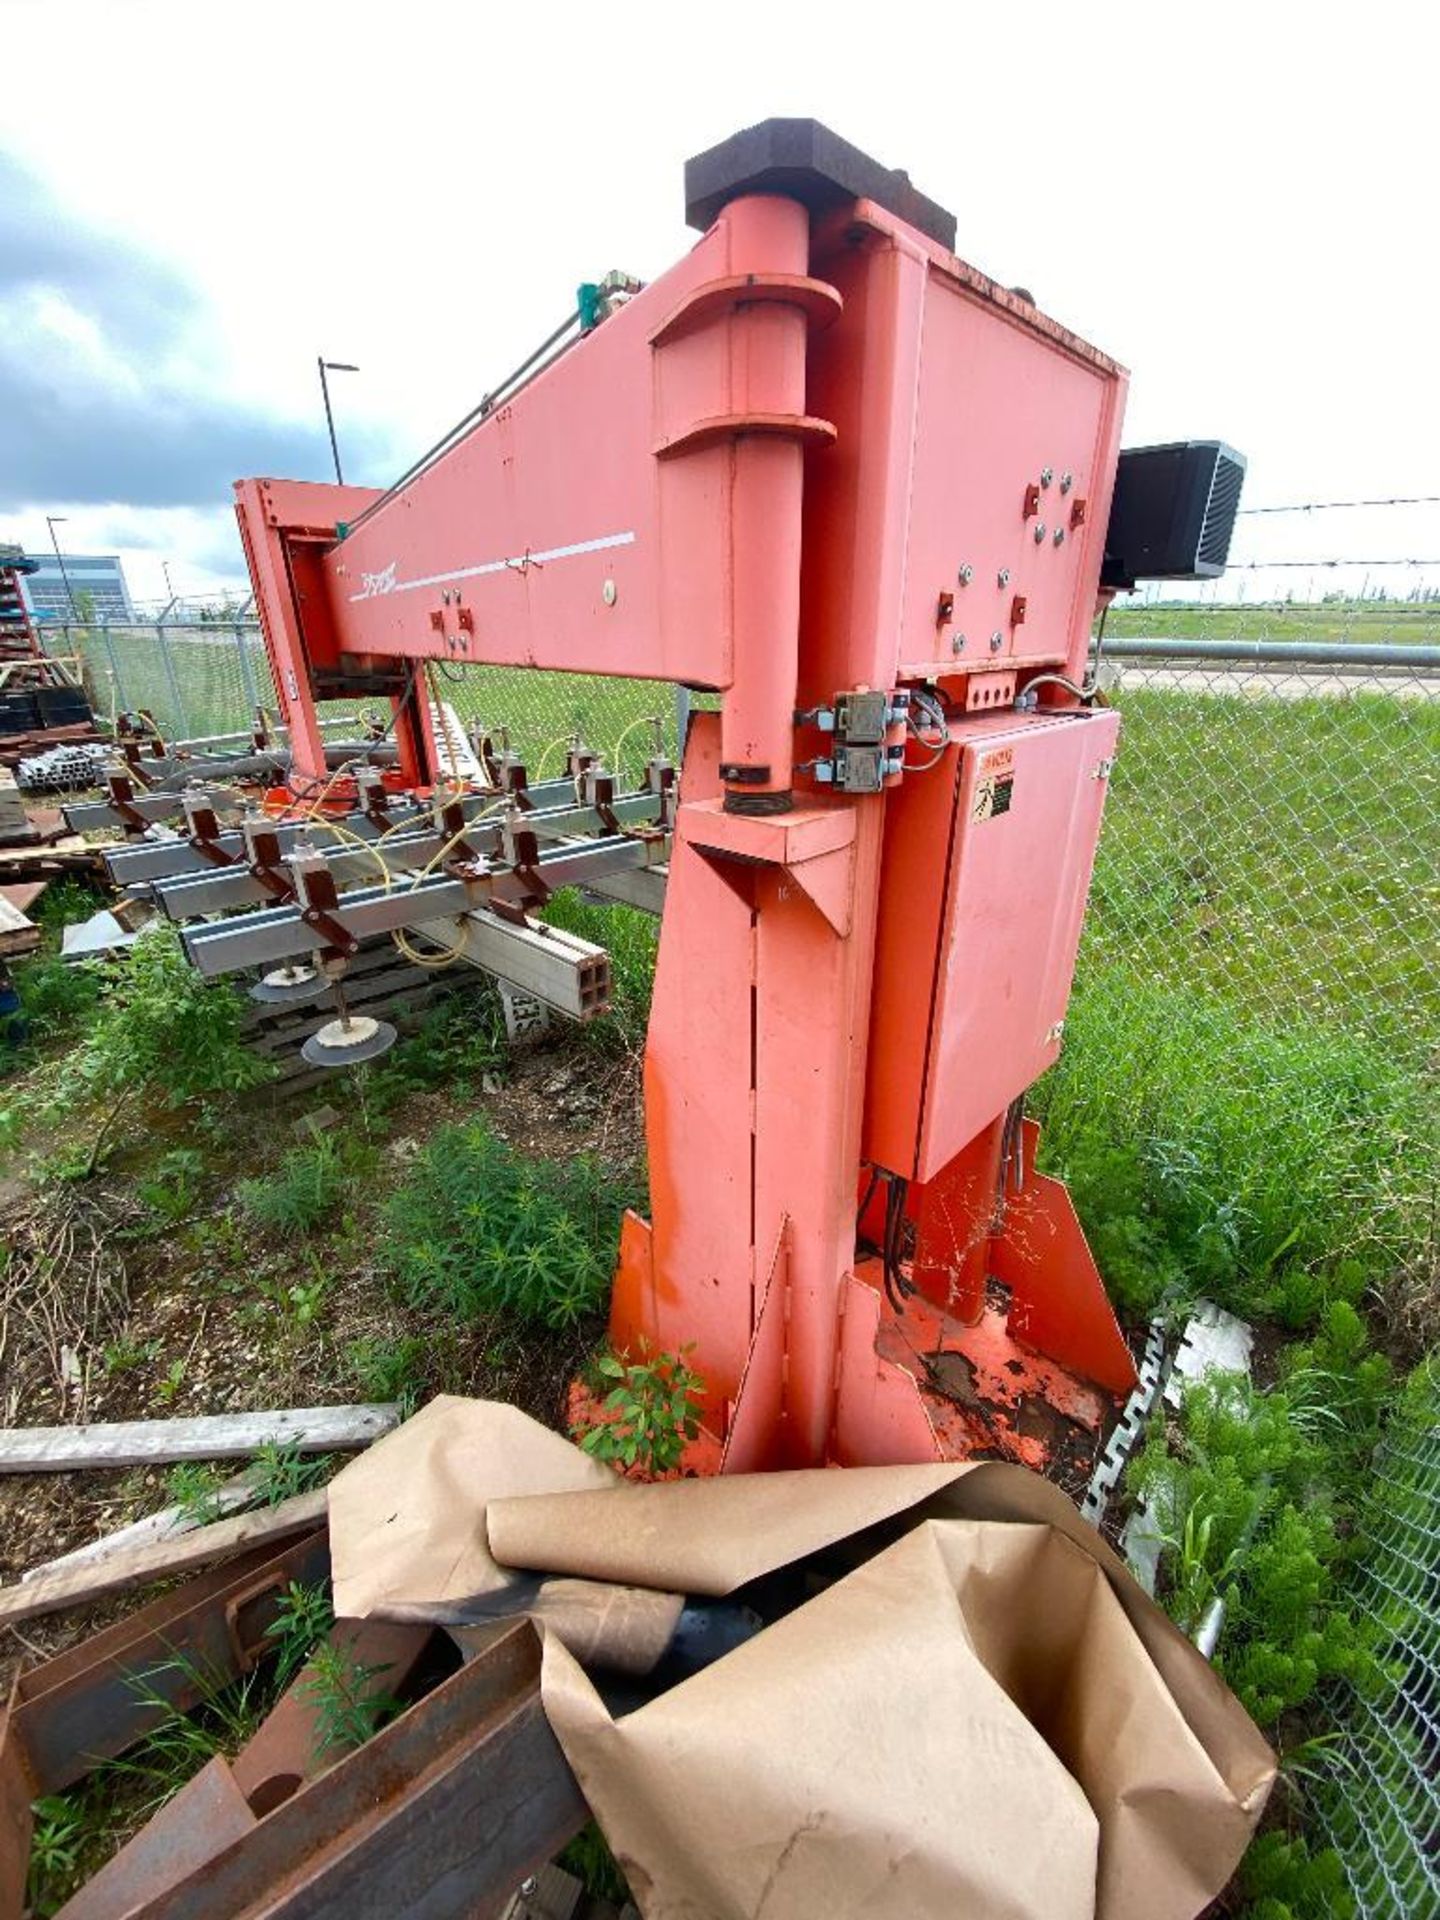 1999 Bystronic 4020 Material Handler - Image 6 of 7